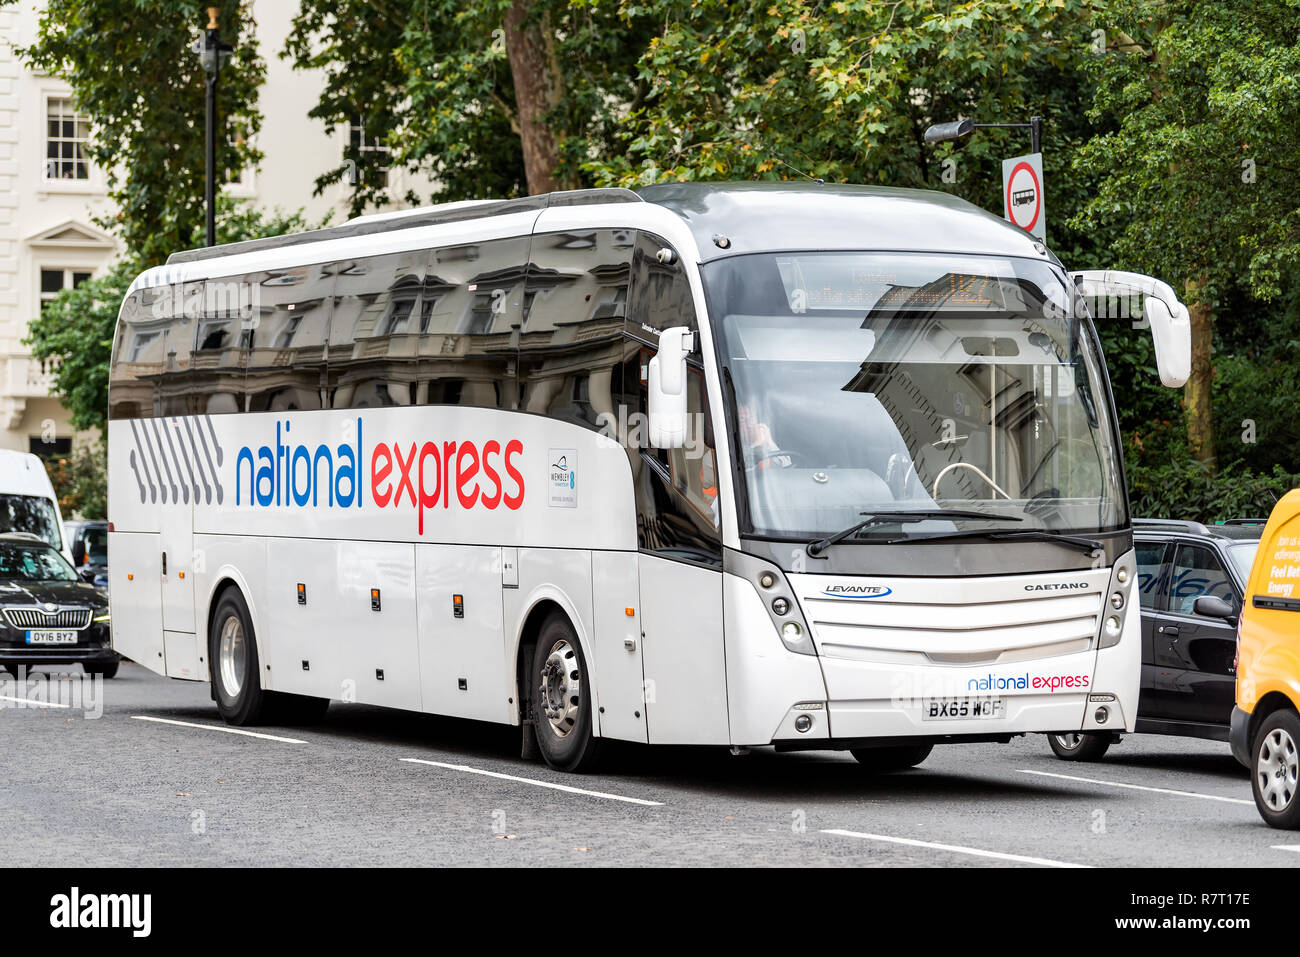 London, United Kingdom - September 12, 2018: National Express coach shuttle bus white sign text modern luxury transport service in traffic on street r Stock Photo